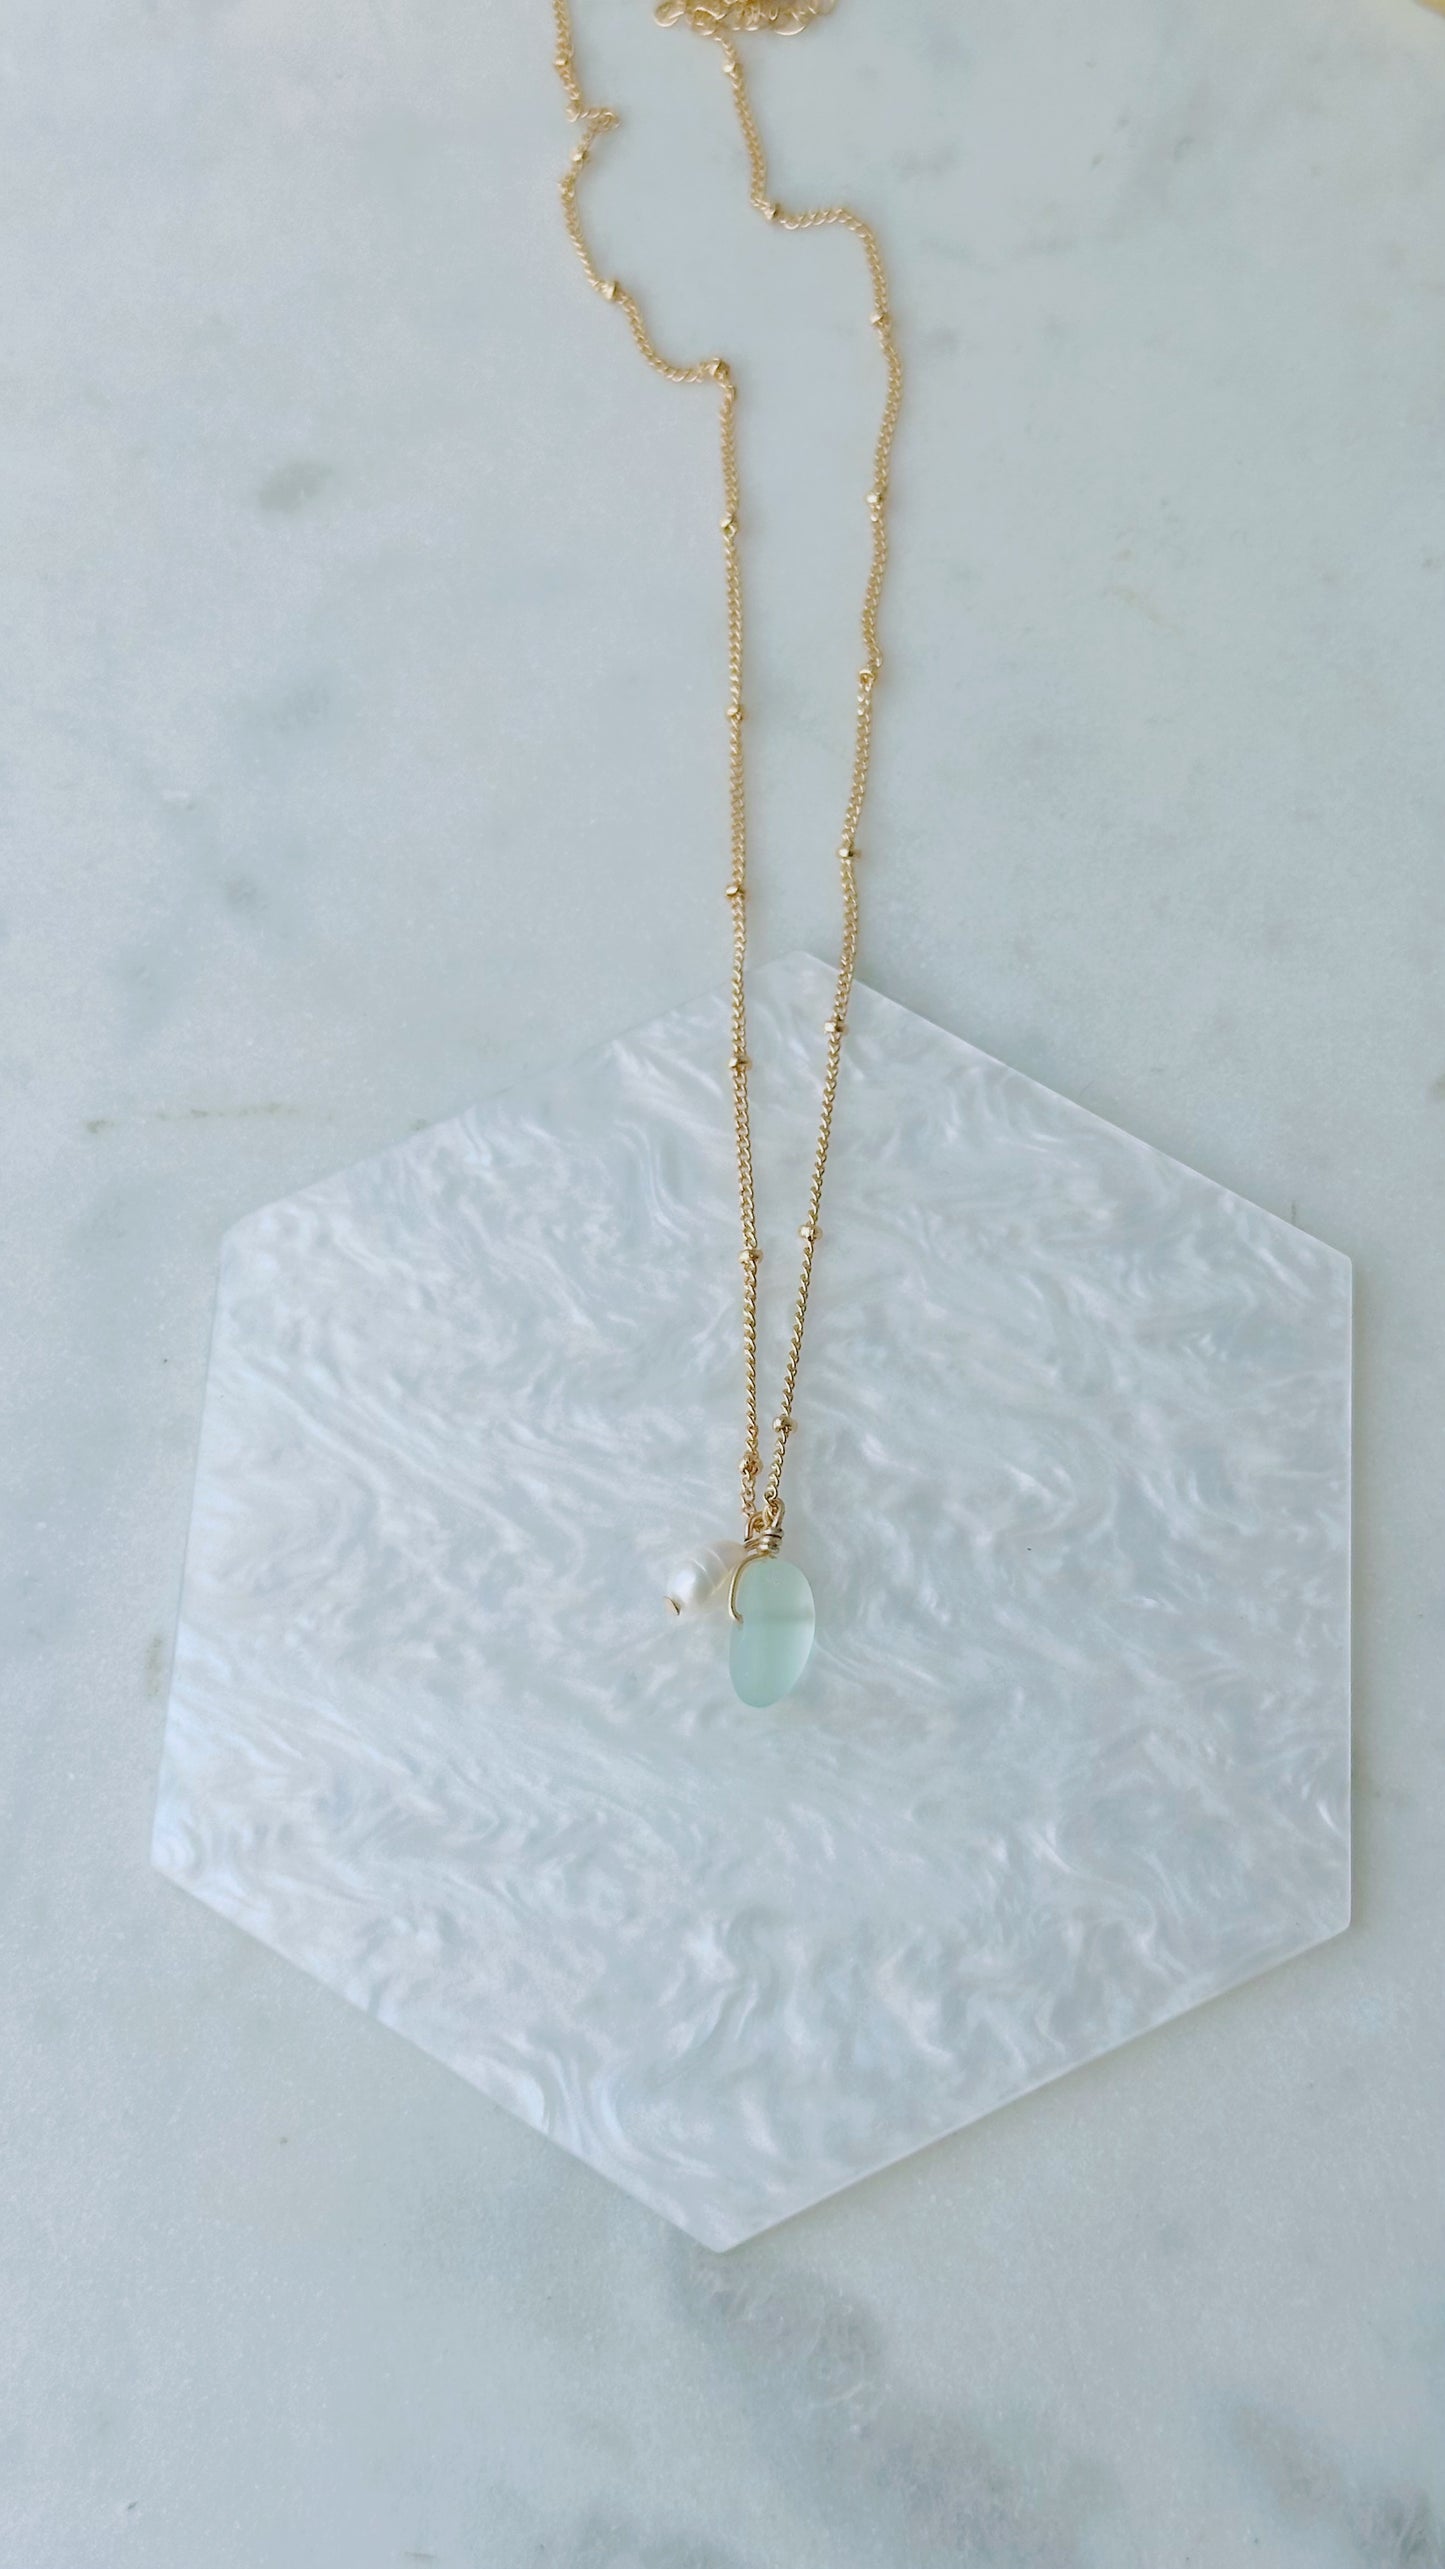 Seaglass & pearl necklace